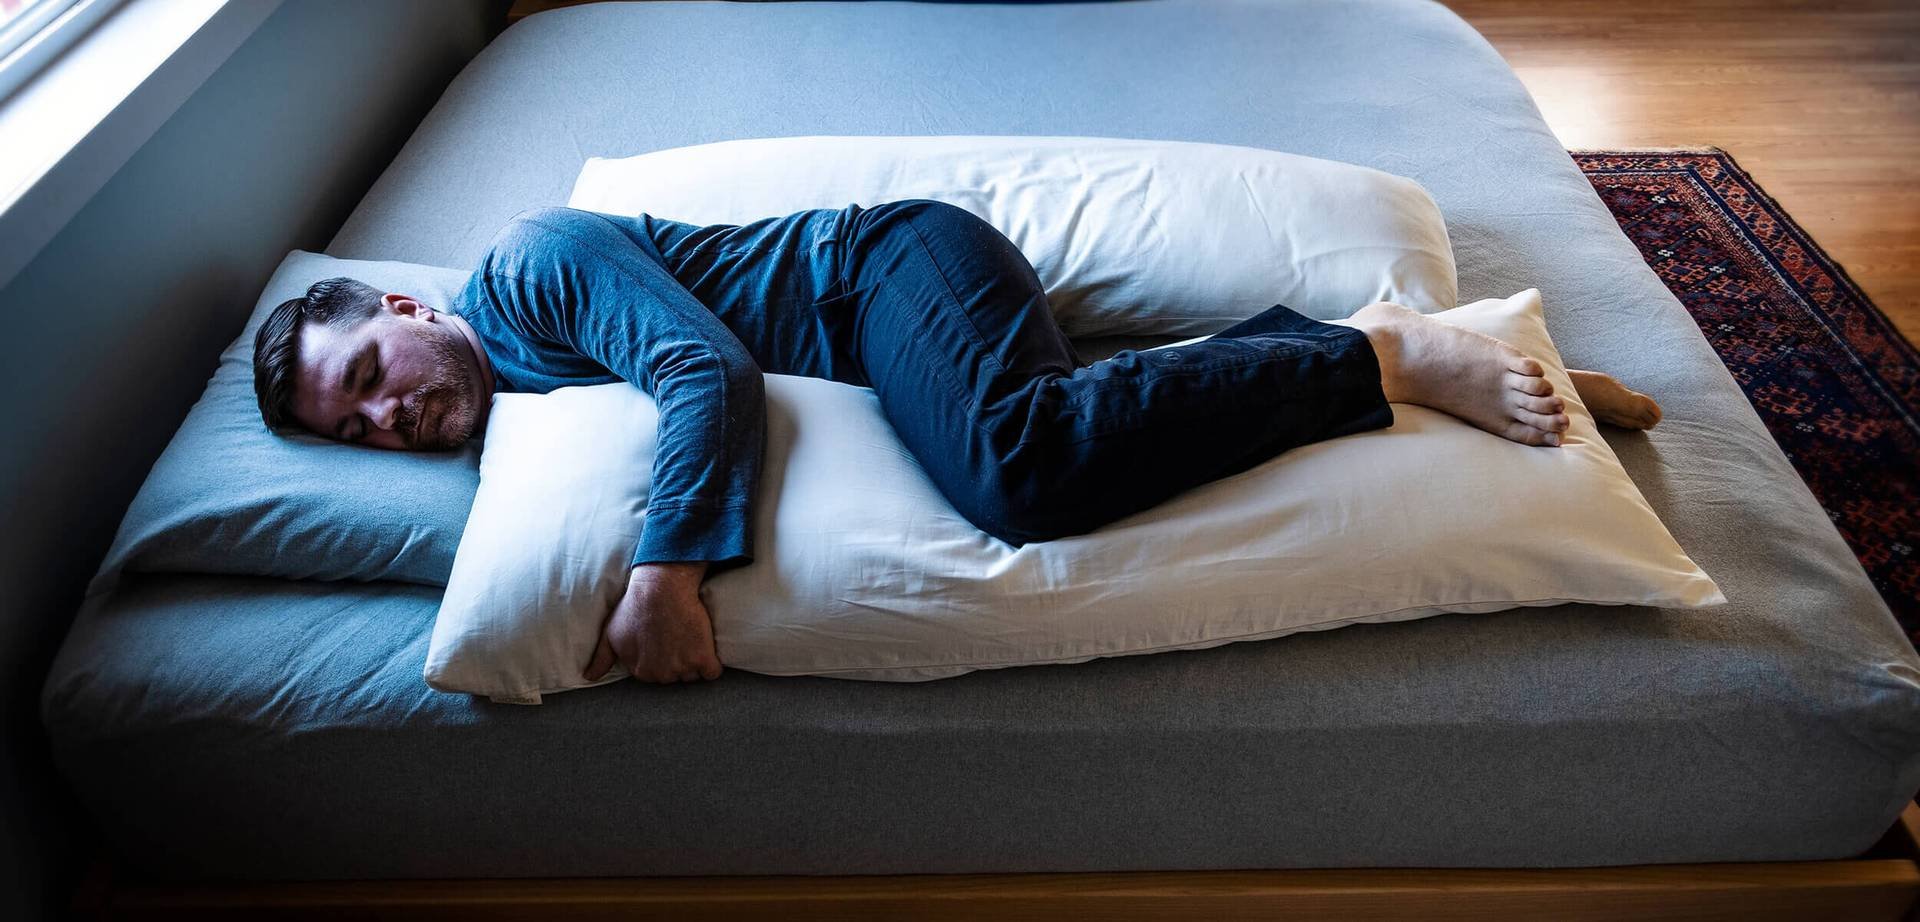 Proper sleeping position – Relieve the pain